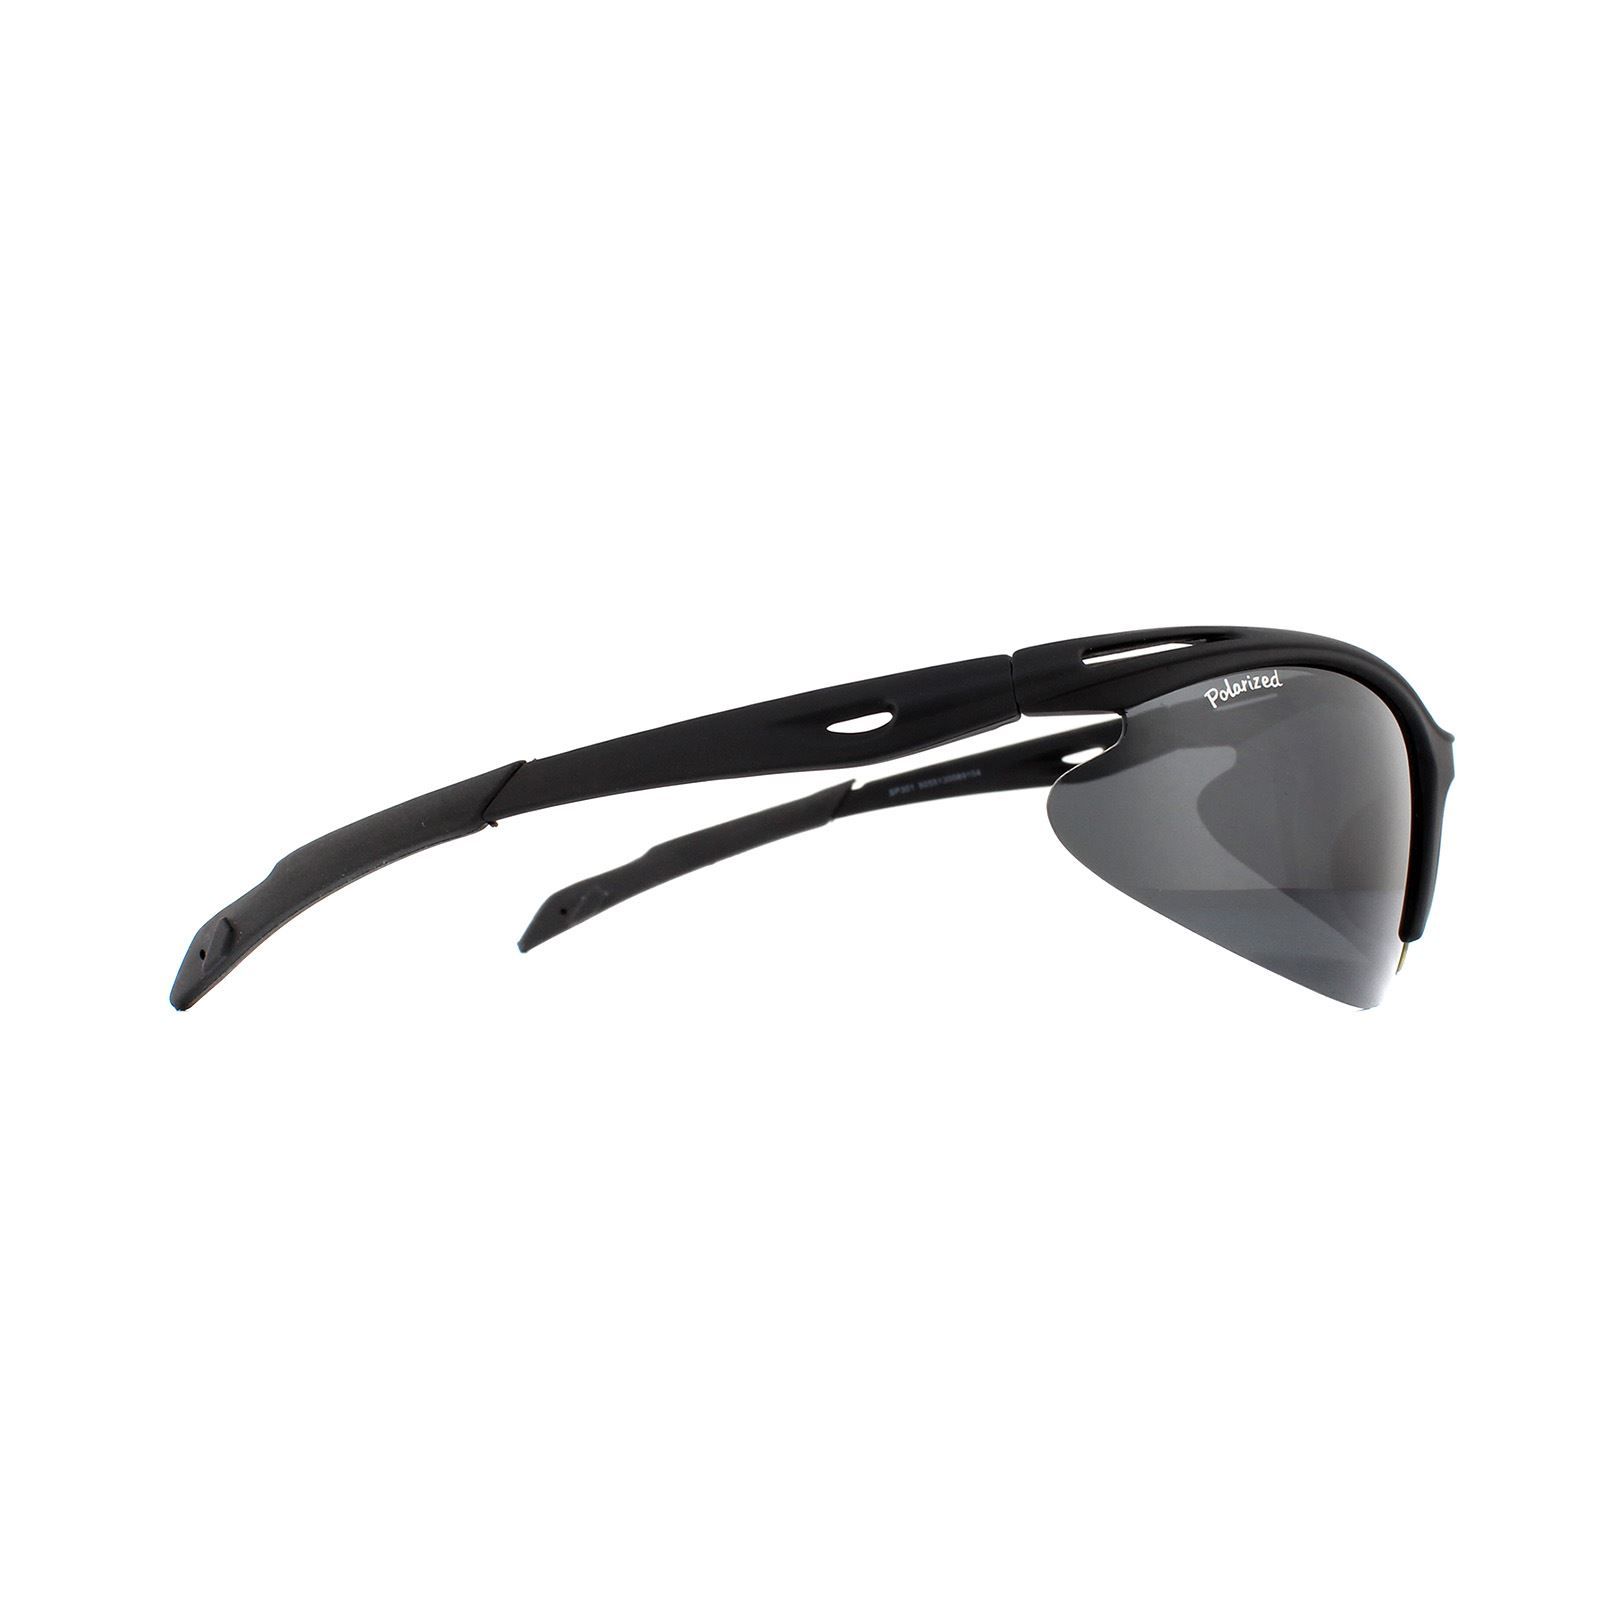 Montana Sunglasses SP301 Black Rubber Smoke Polarized are a lightweight semi-rimless style perfect for sports. Rubberised nose pads and temple tips ensure comfort and hold the sunglasses in place at all times. Polarized lenses guarantee comfort and eliminate glare to reduce eye strain.